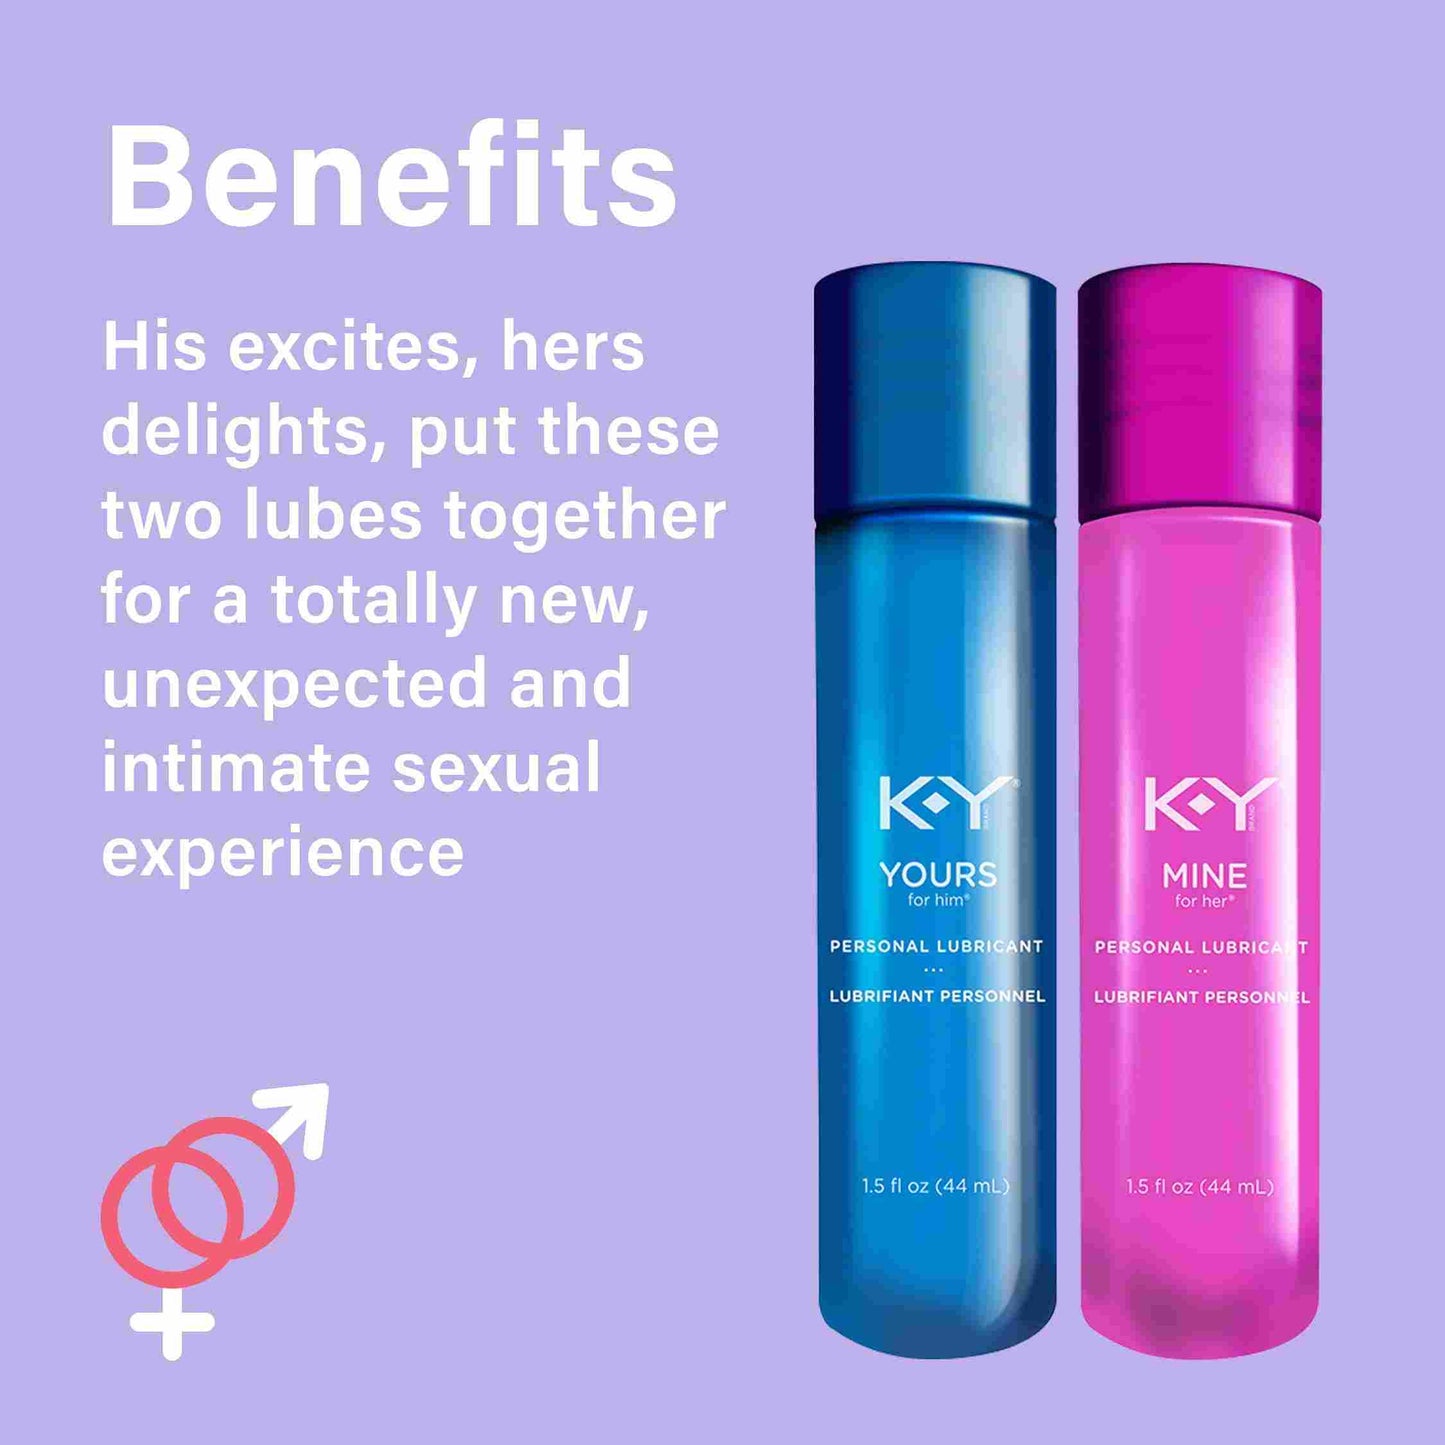 K-Y® Yours + Mine Couples lubes work together with warming and tingling sensations for him & her.